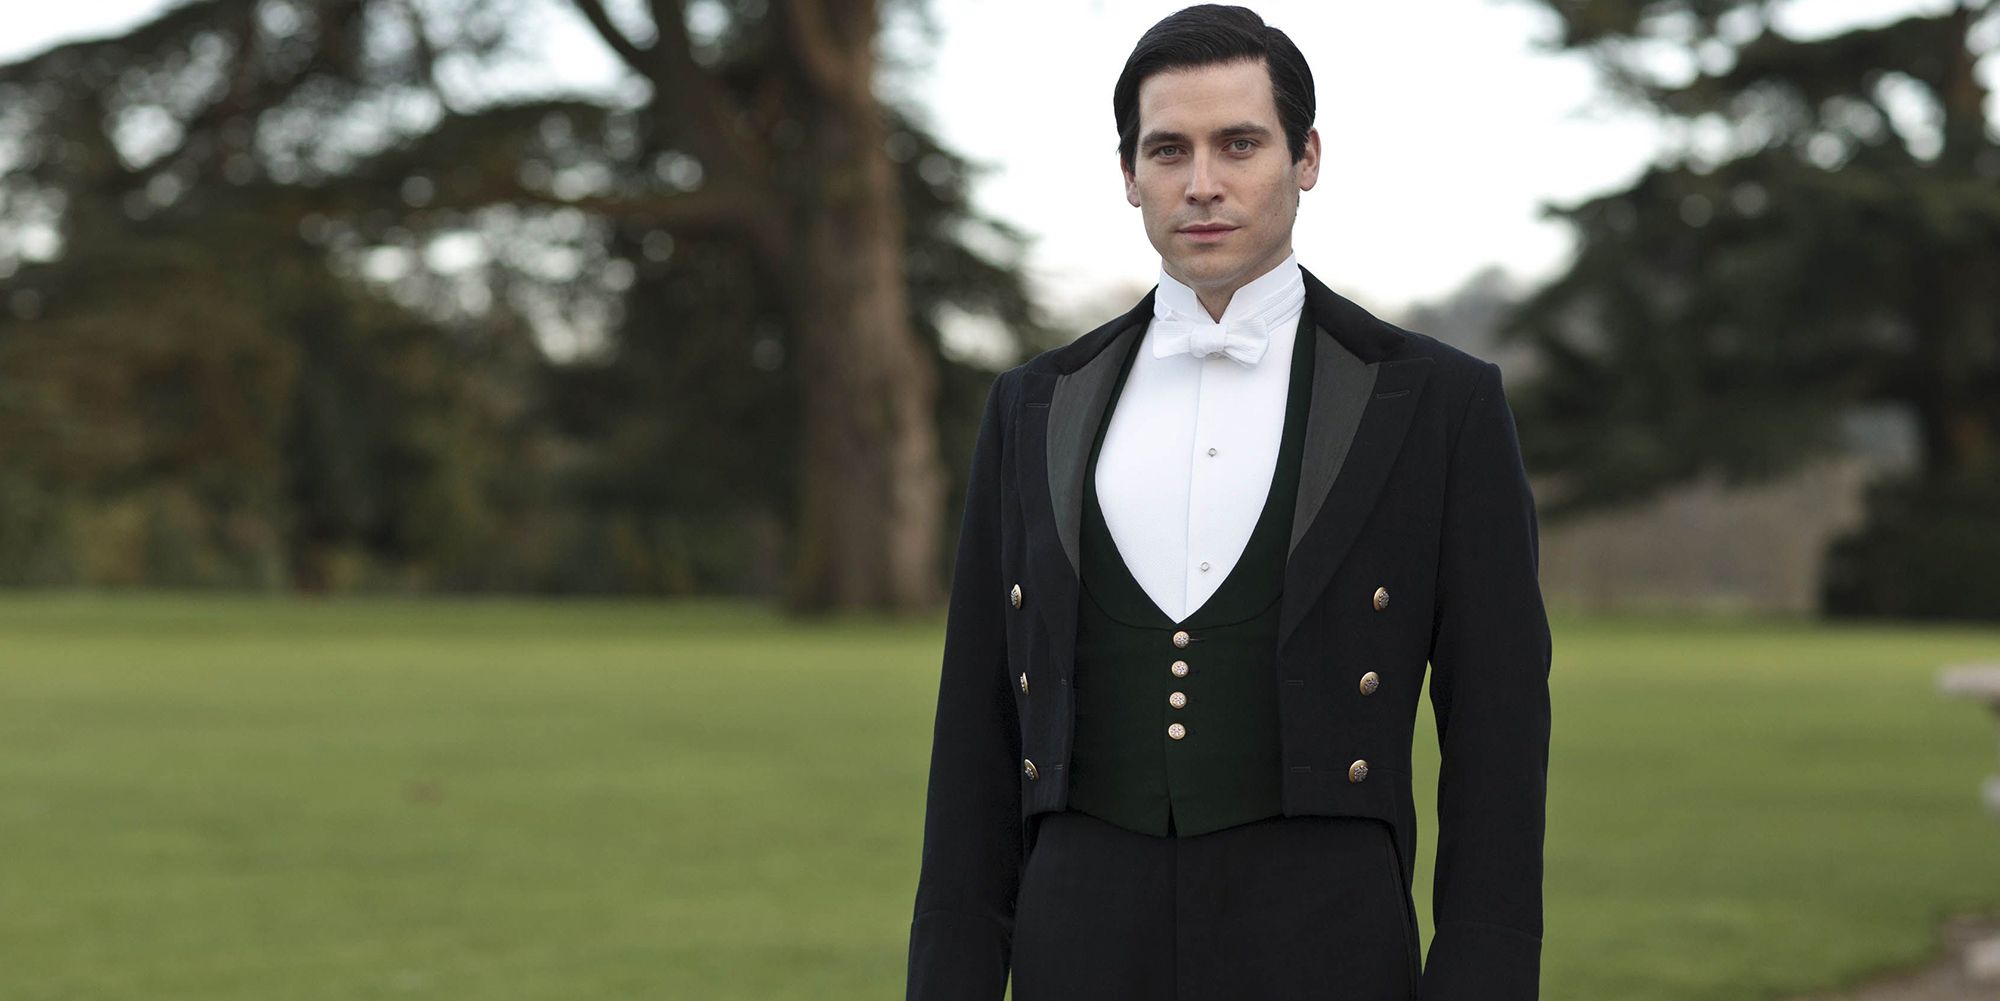 Thomas posing outside in livery in Downton Abbey